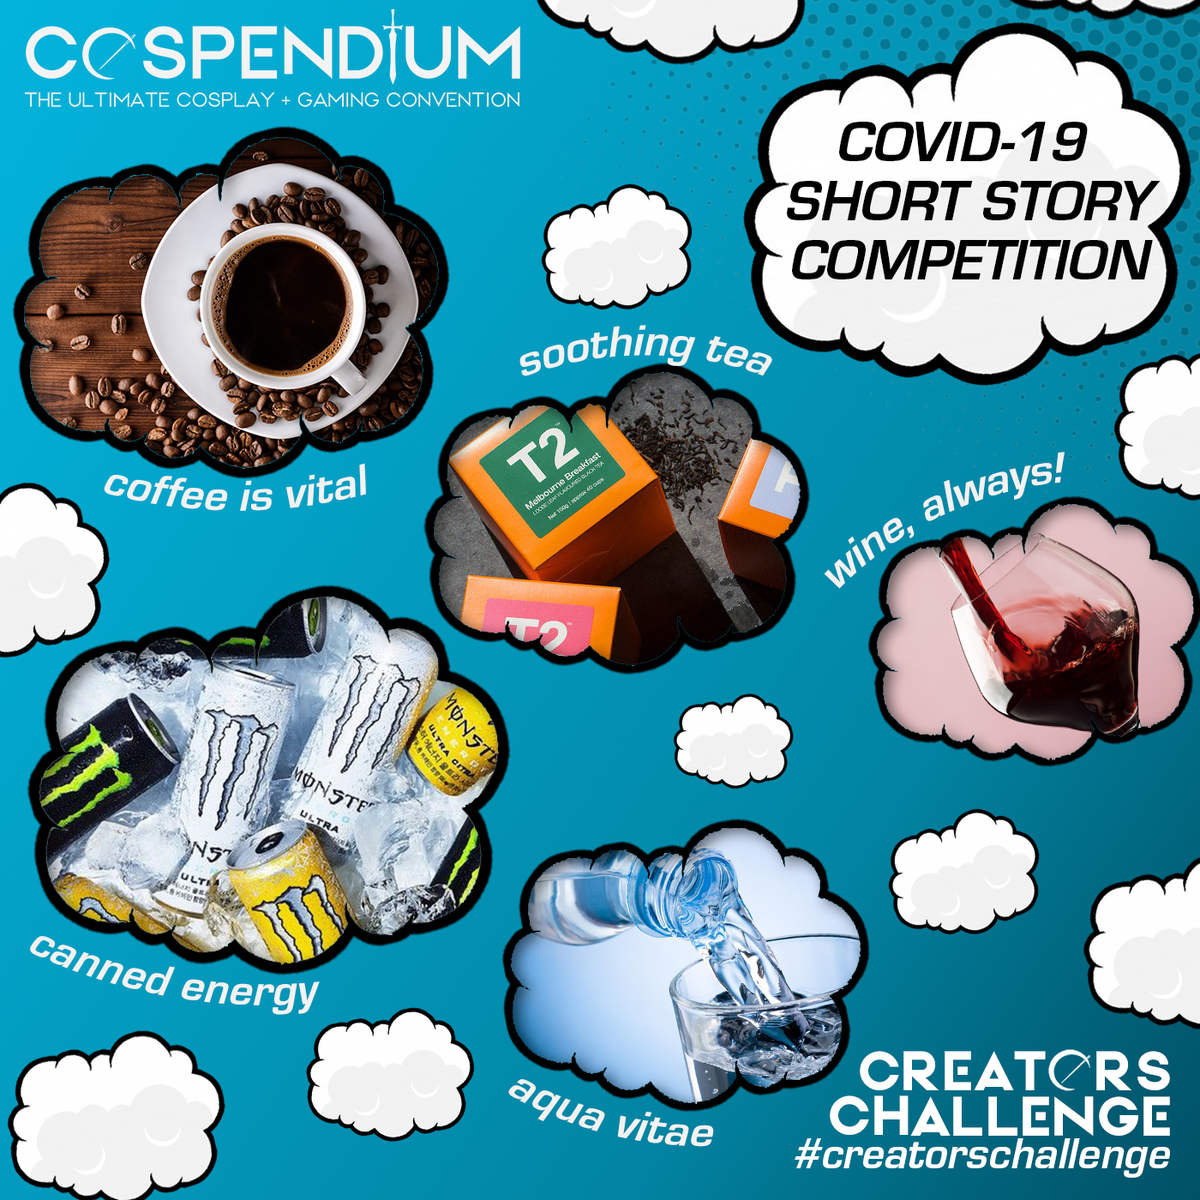 Do you have a writing companion?

A cheeky glass of wine, or a midnight coffee, what is your go to when you are in your creative zone? Throw a comment down below with what your ideal writing companion is!

Visit cospendium.com.au
#creatorschallenge #shortstory